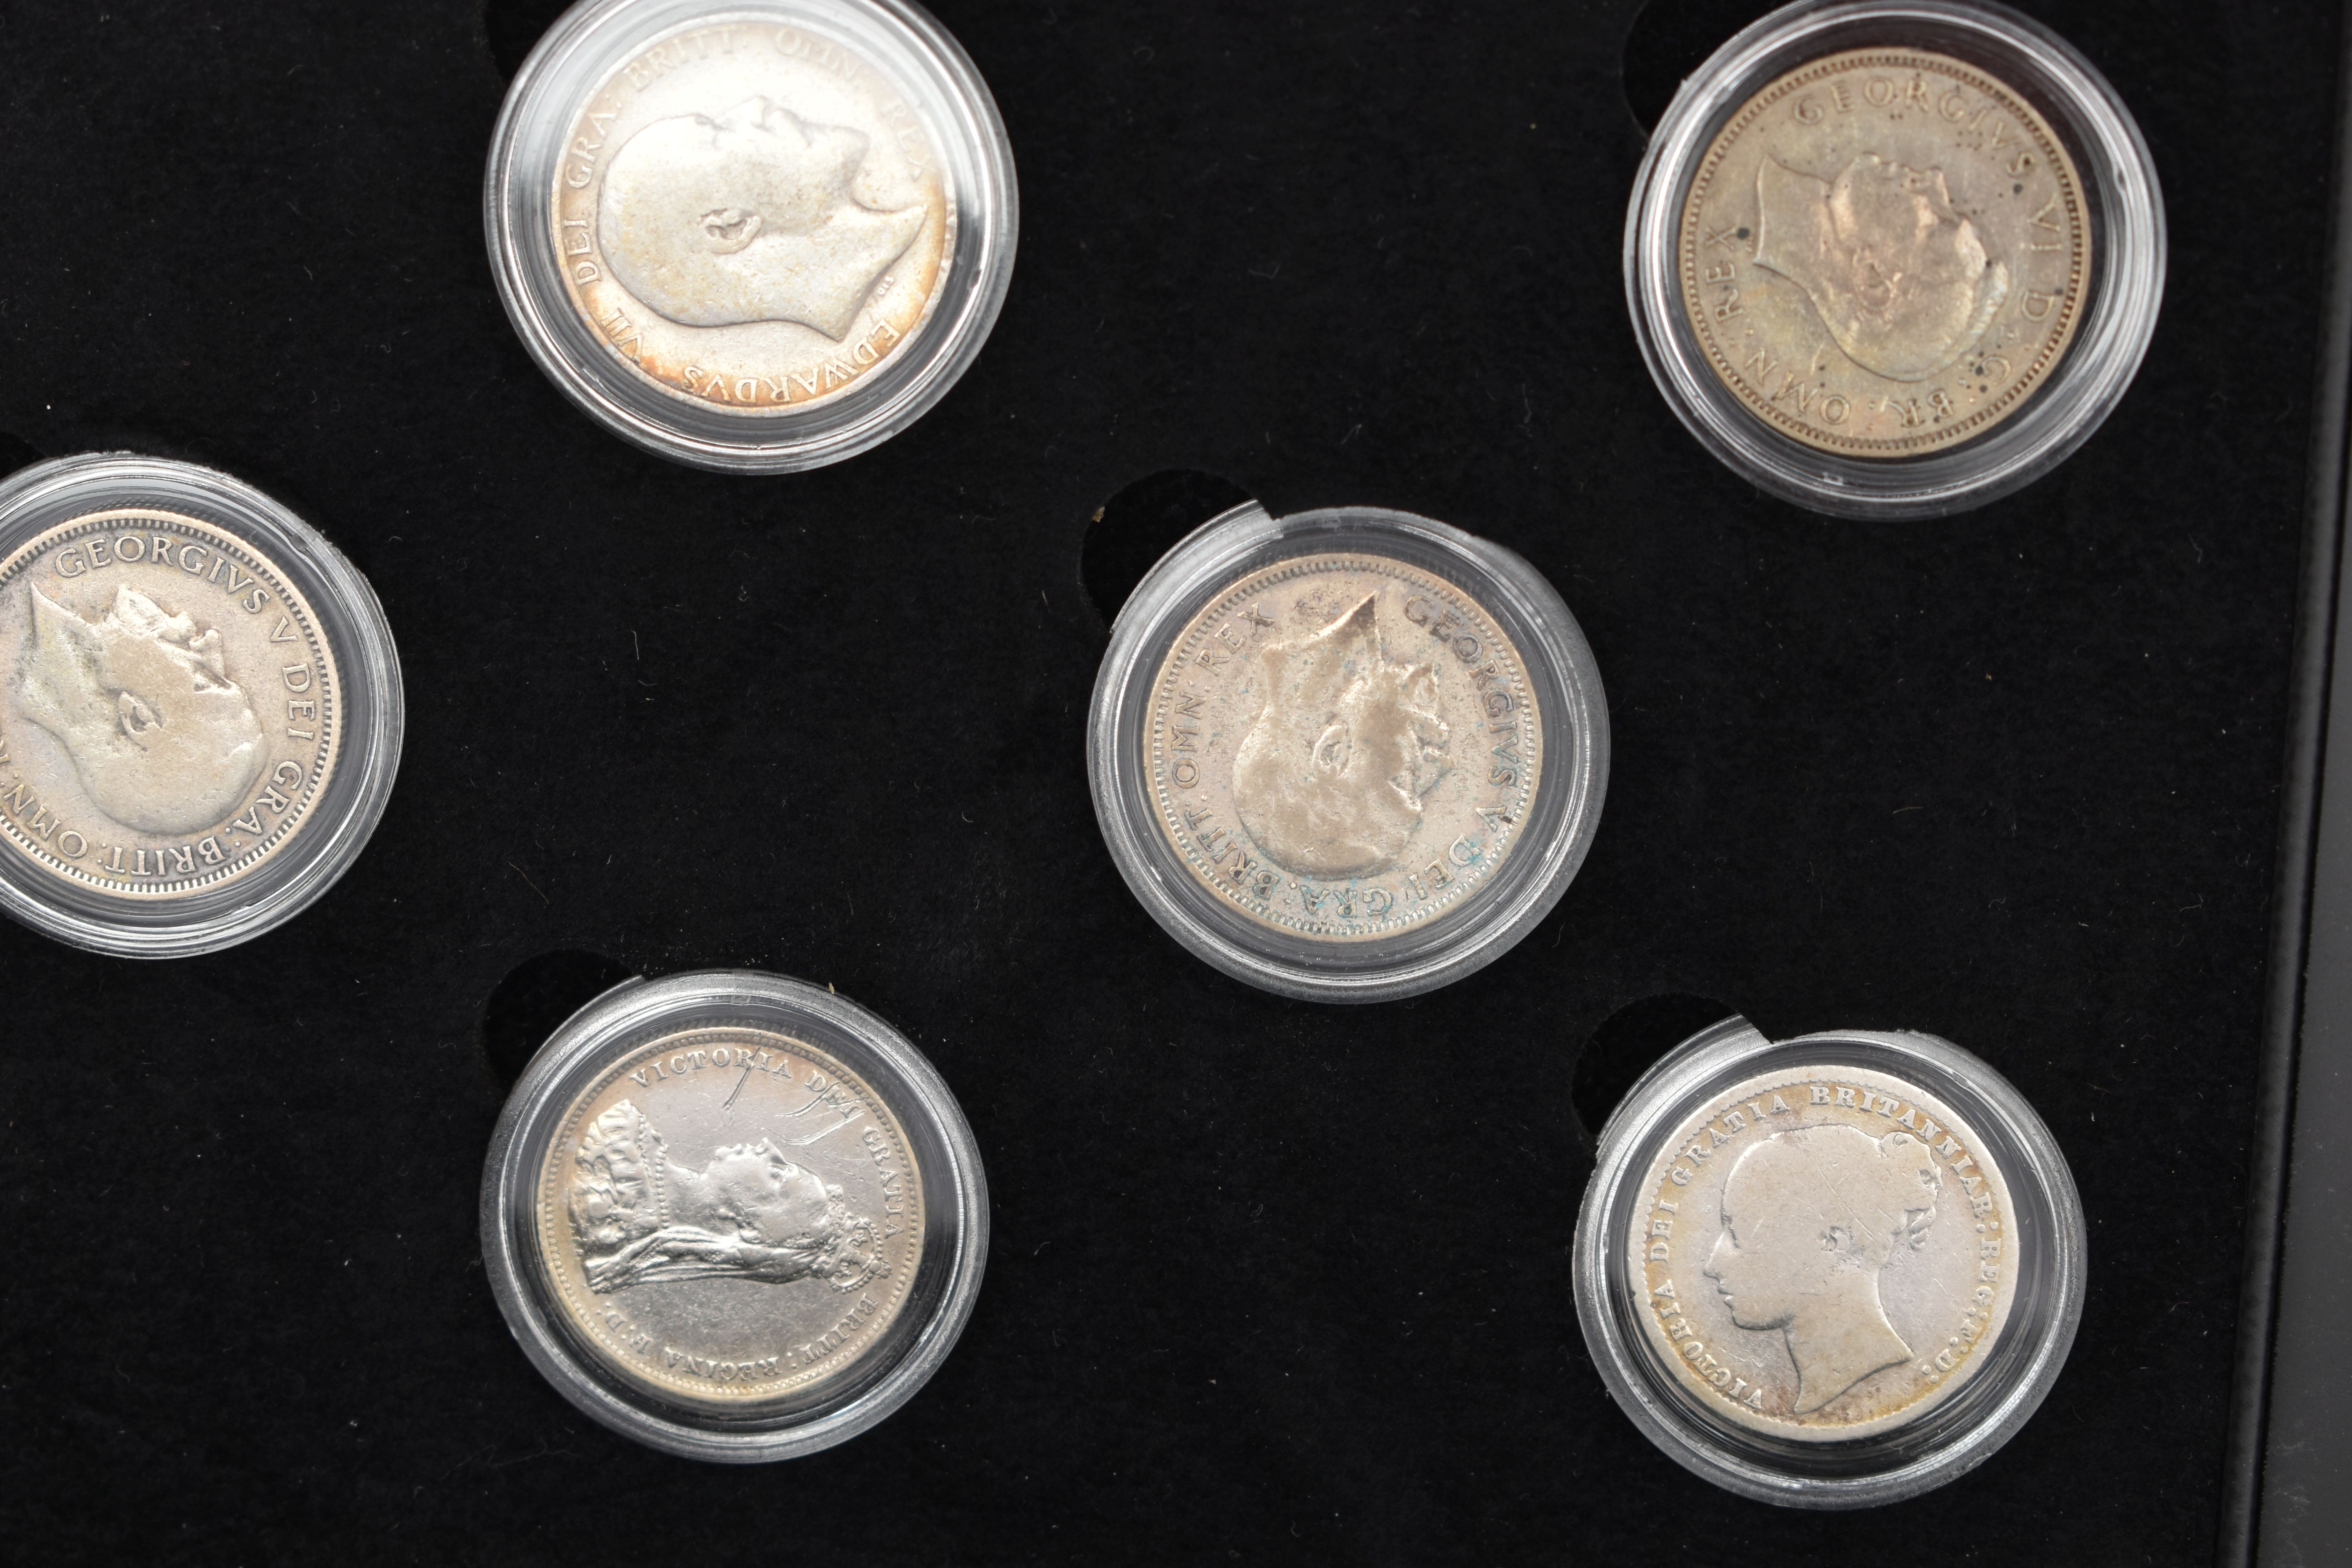 A CASED SET OF COMMEMORATIVE COINS, The House of Windsor coinage portraits shilling set by The - Image 3 of 6